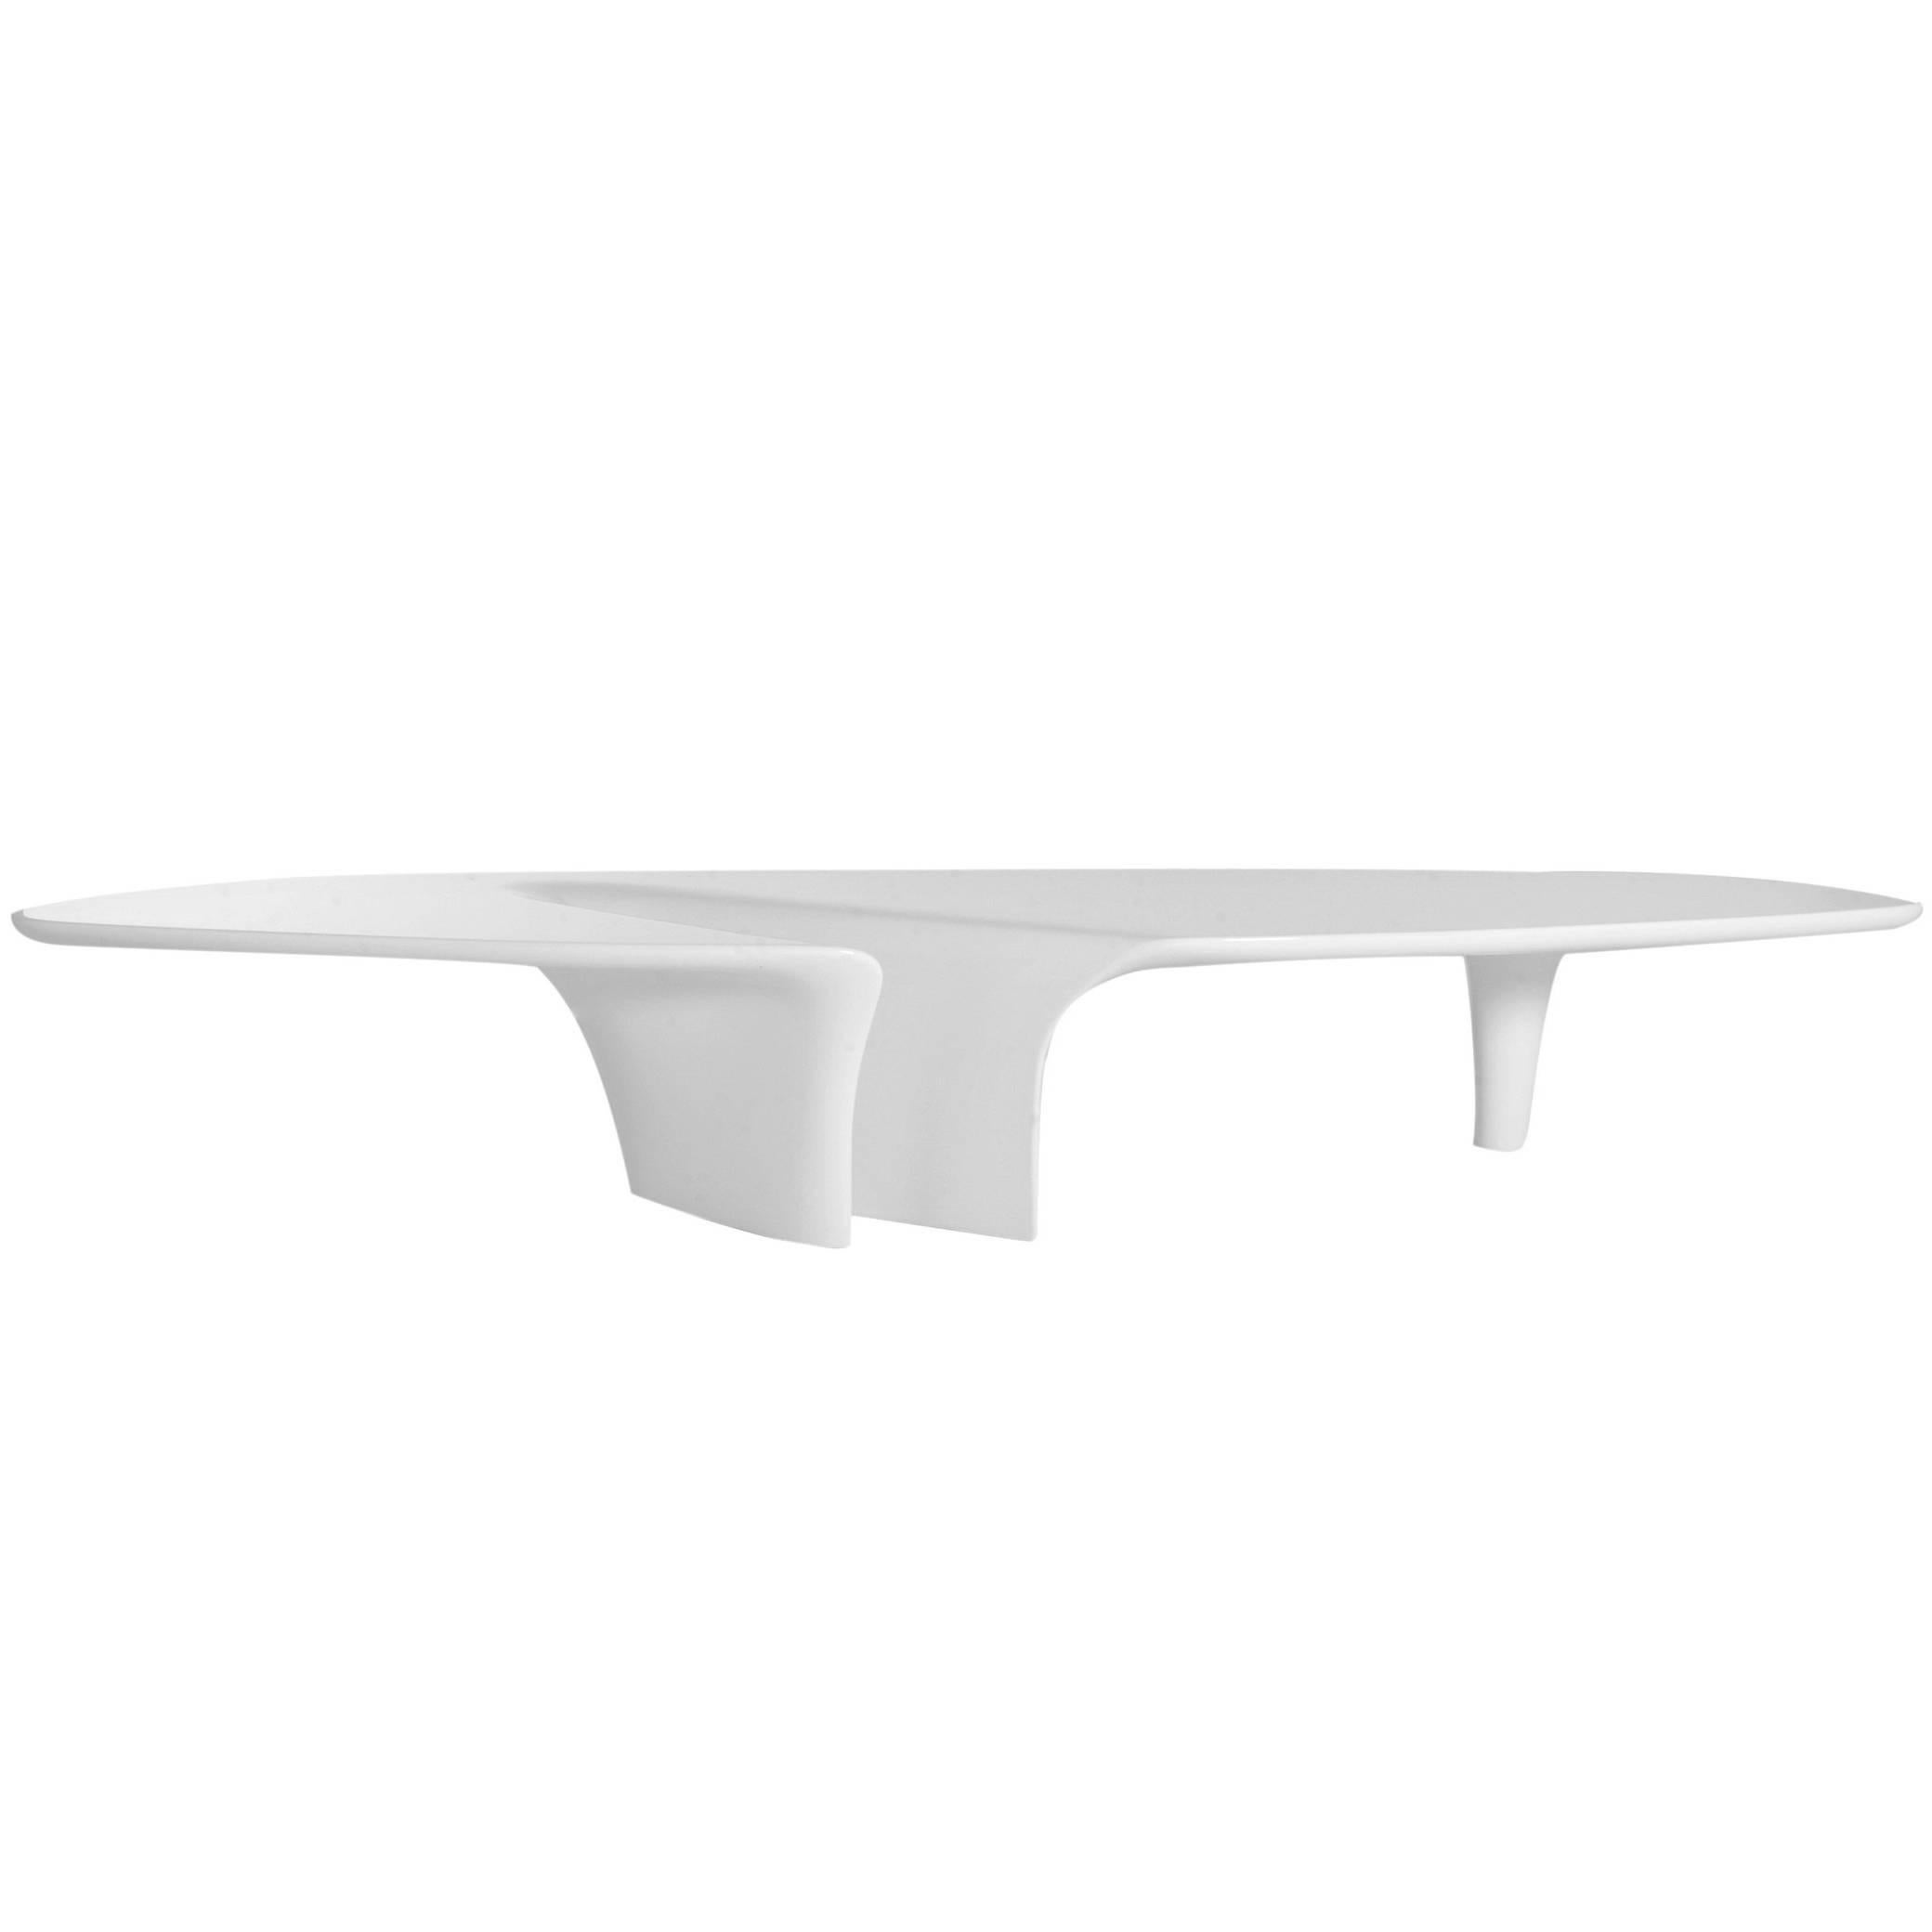 "Waterfall" Lacquered Coffee Table Designed by Fredrikson Stallard for Driade